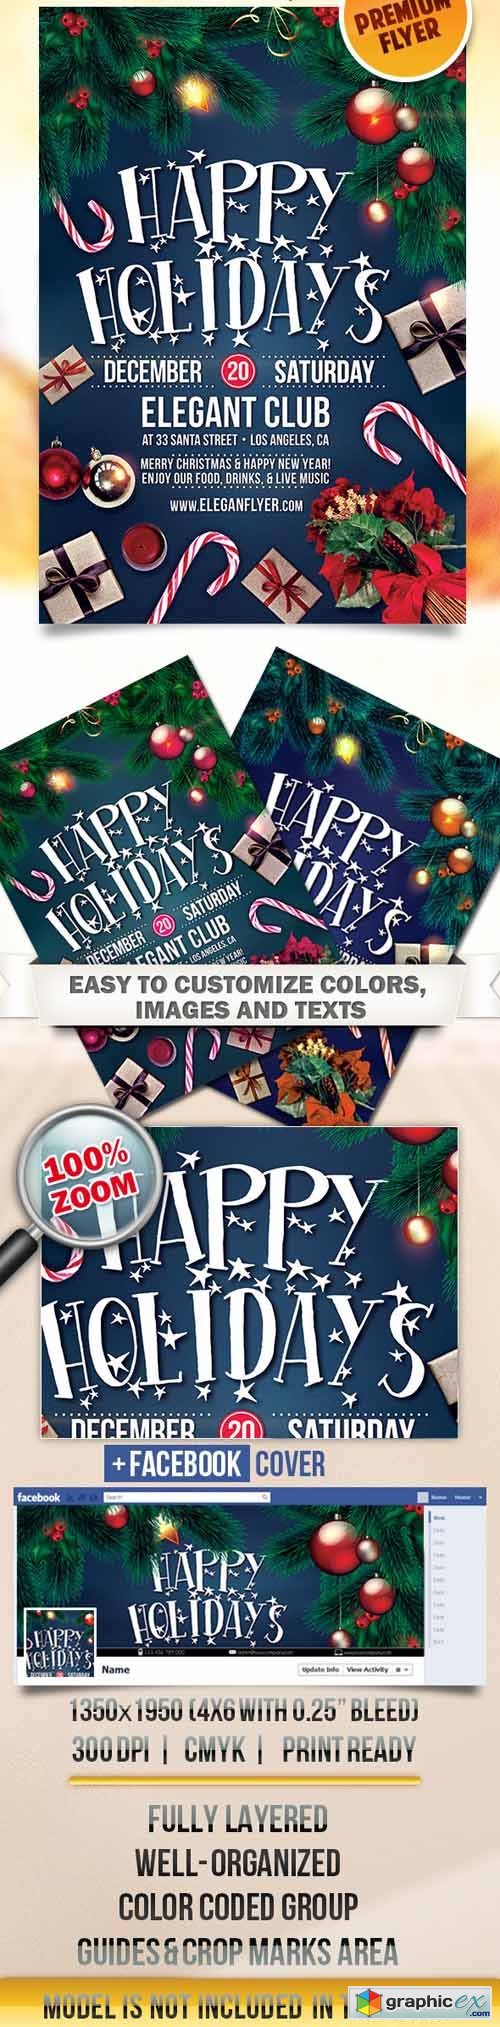 Happy Holidays  Flyer PSD Template + Facebook Cover